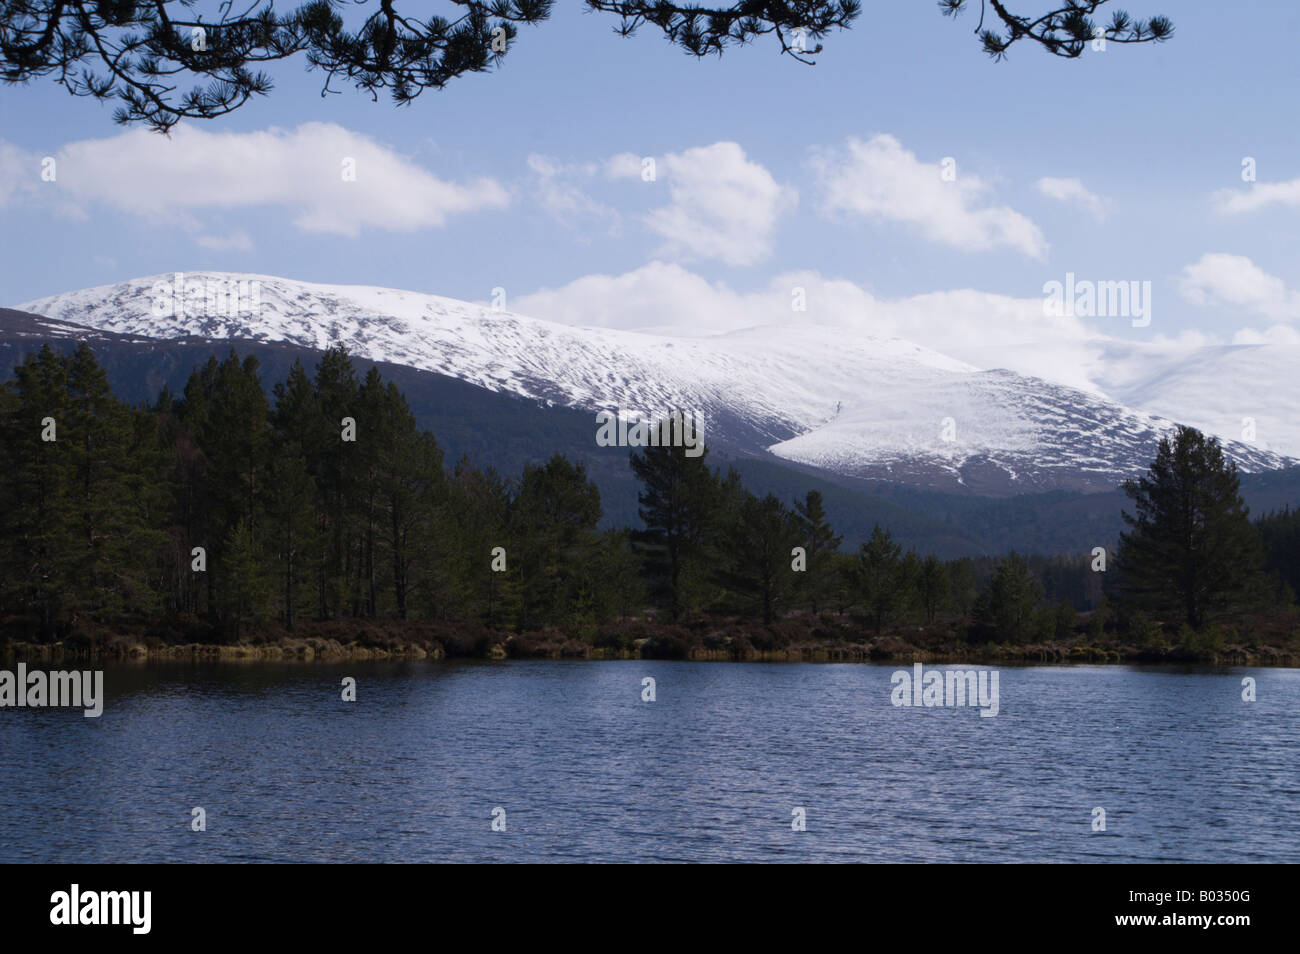 Uath Lochan, a tree-lined Scottish loch (lake) with mountains in the background. Stock Photo